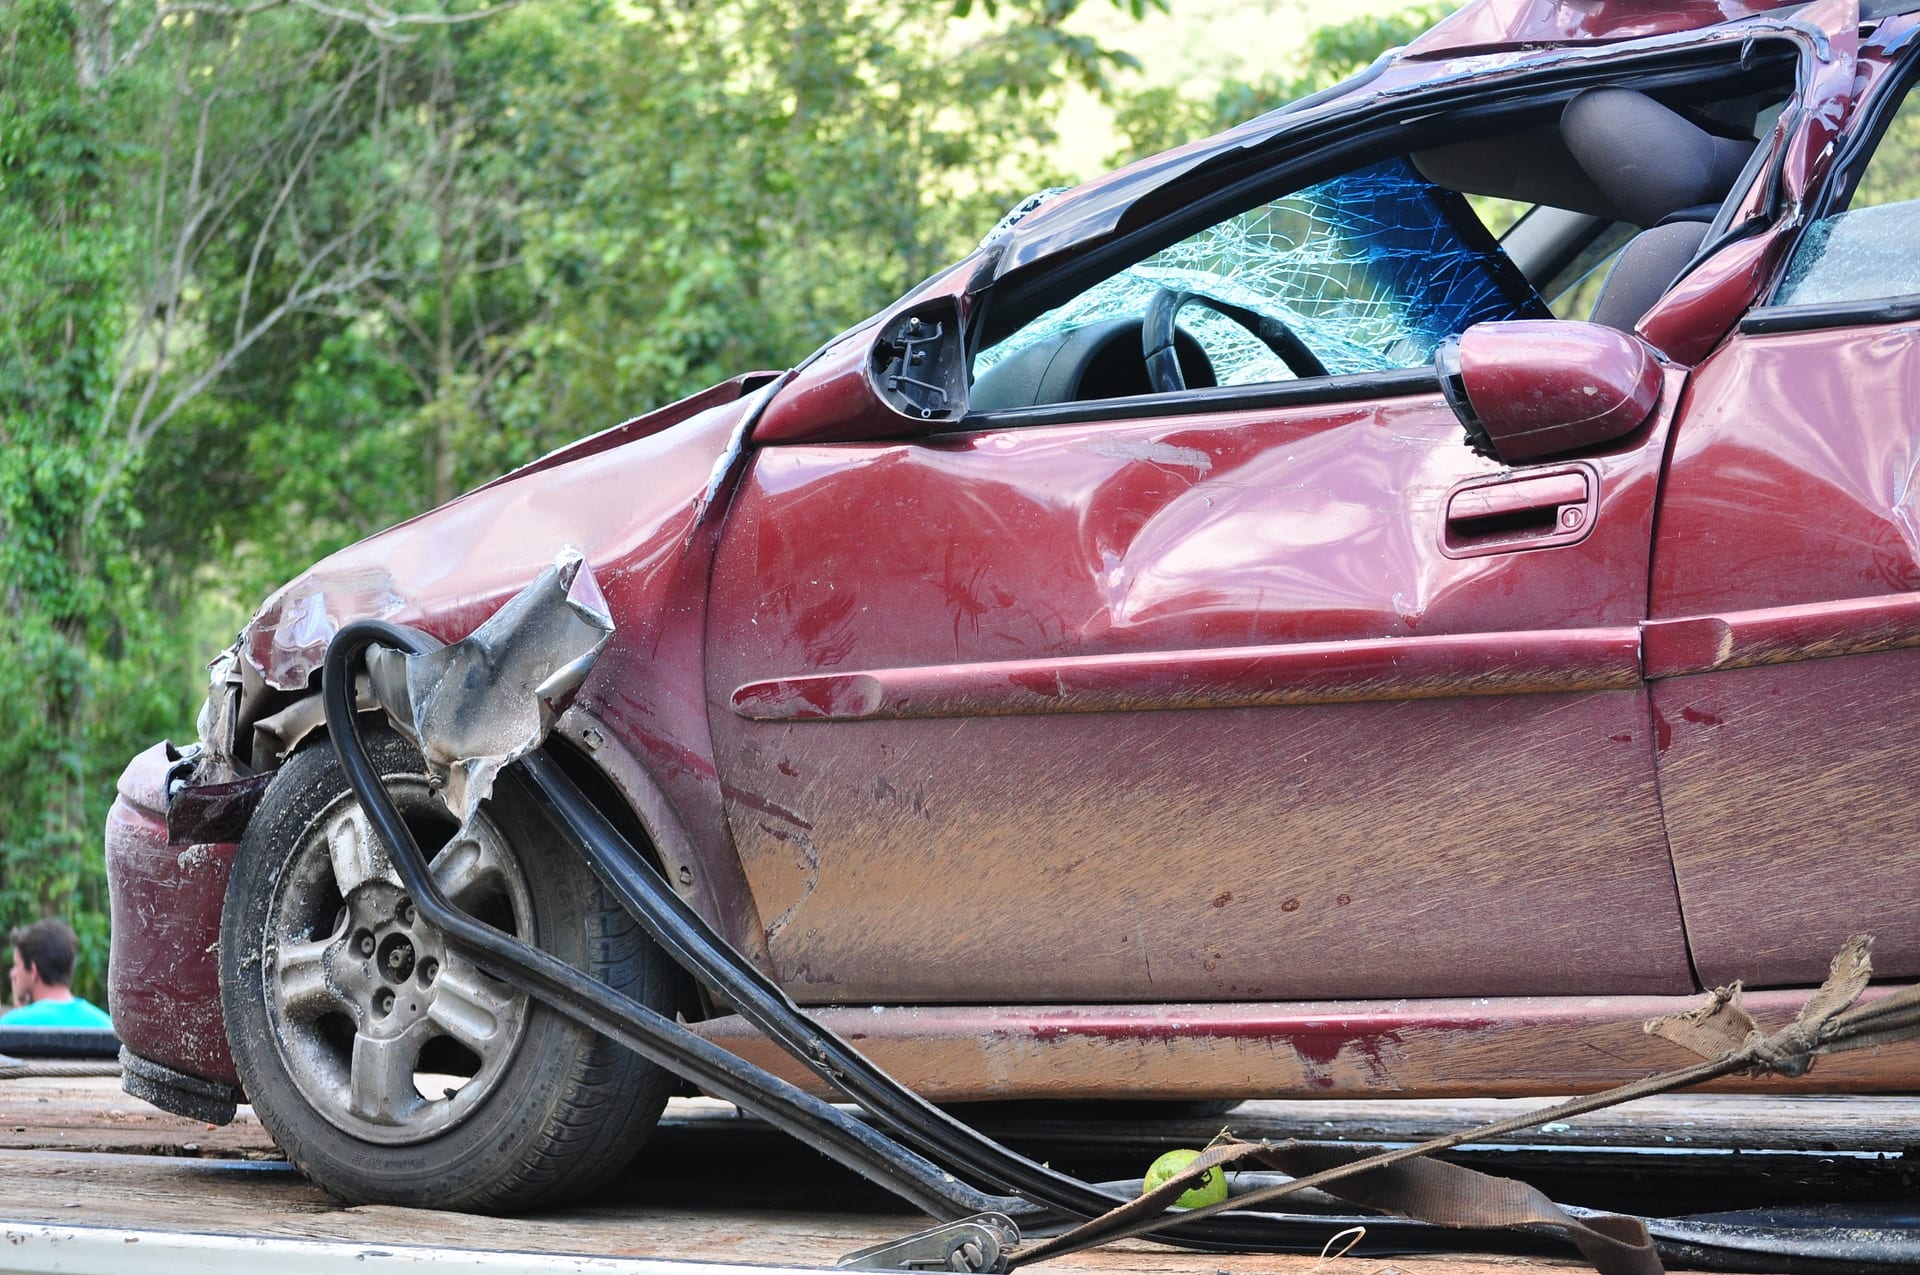 Maroon car badly damaged in auto accident; image by NettoFiguiredo, via Pixabay.com.